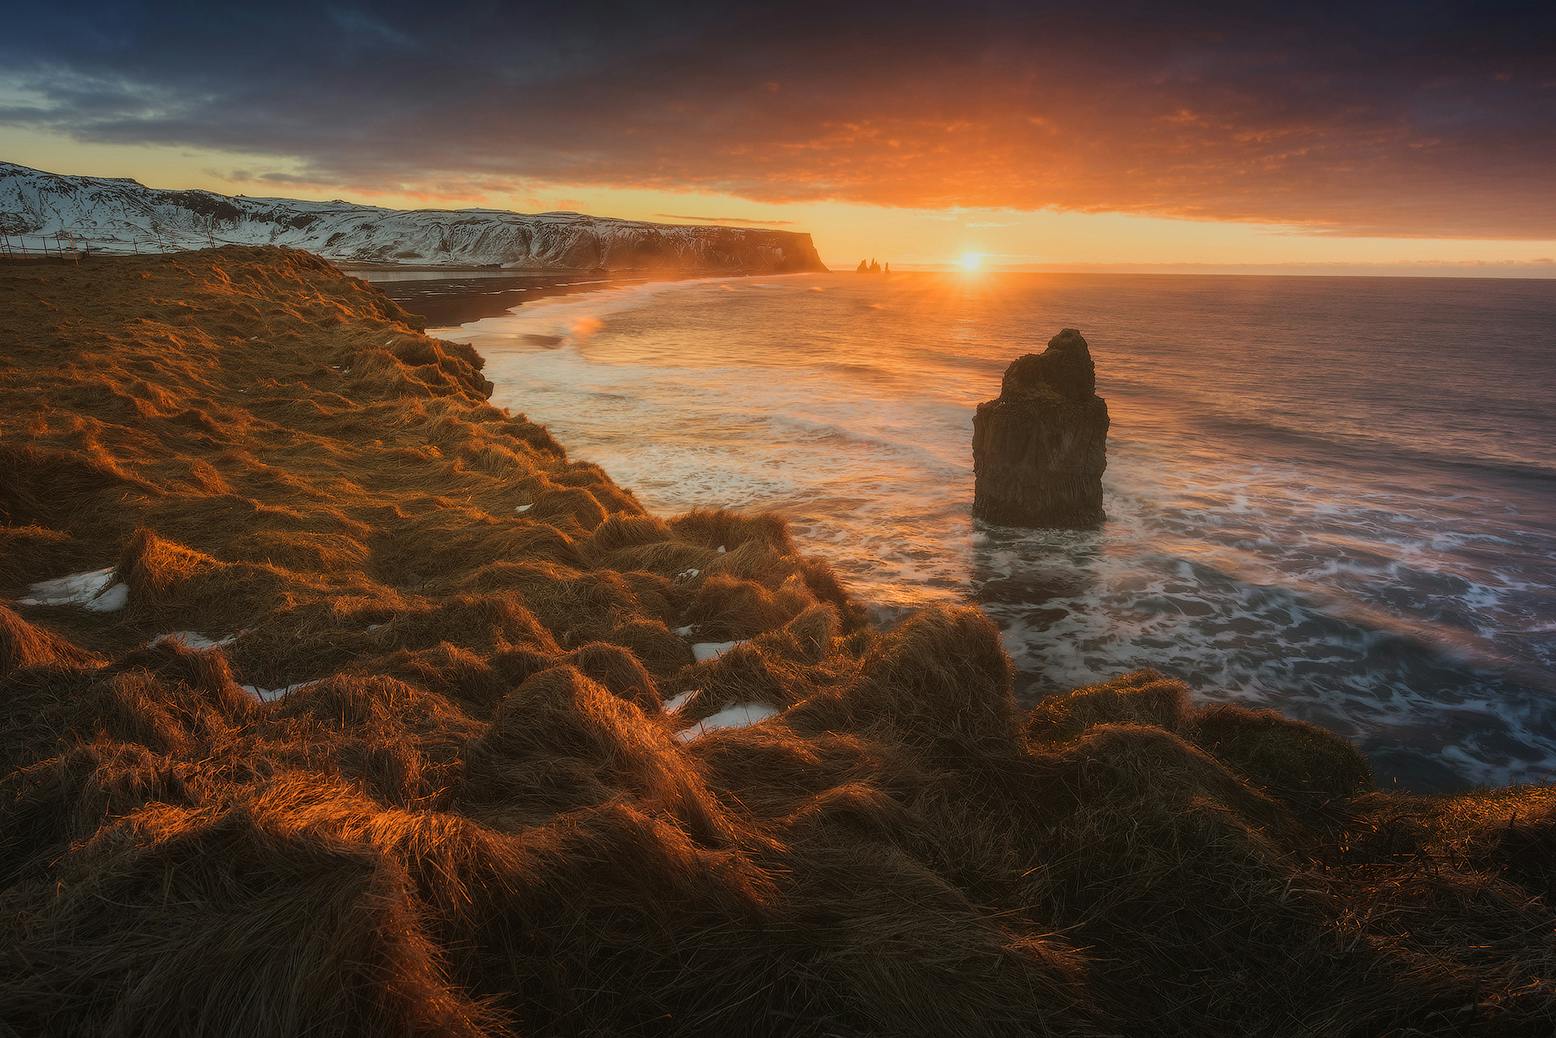 Two Week Circle of Iceland Photo Workshop in Autumn